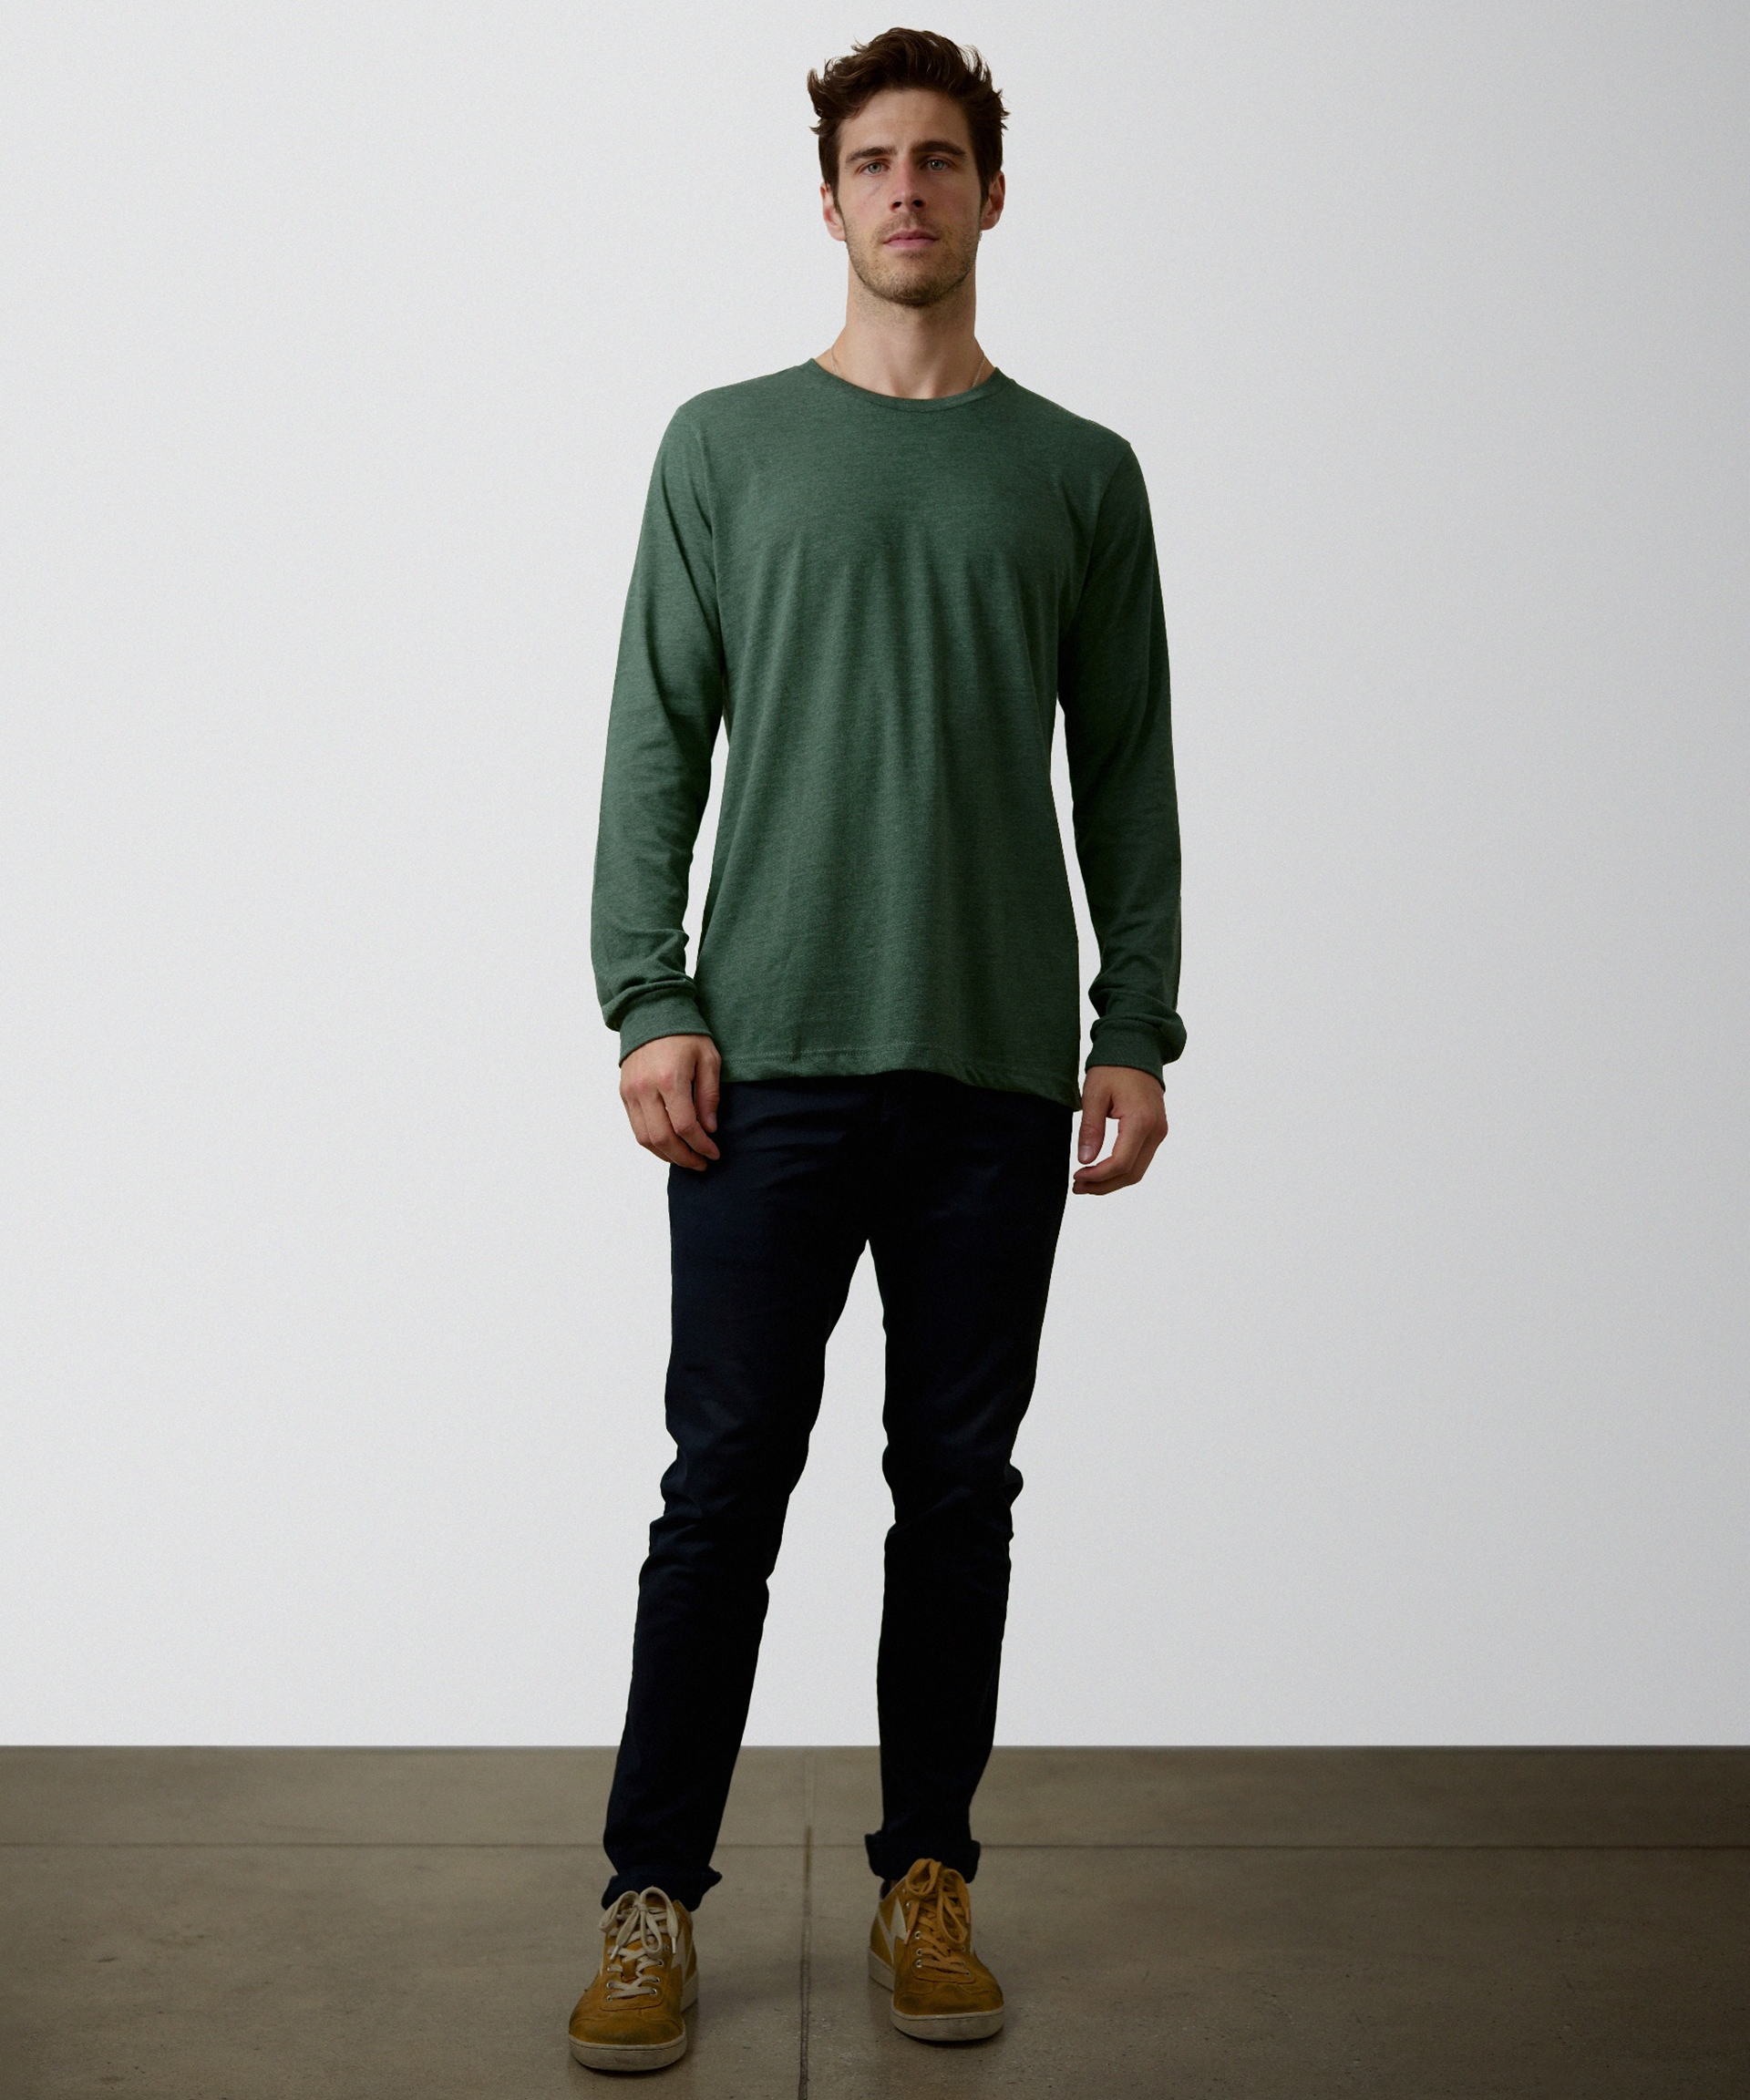 Essential Long Sleeve T-Shirt for Men (Heather Forest)